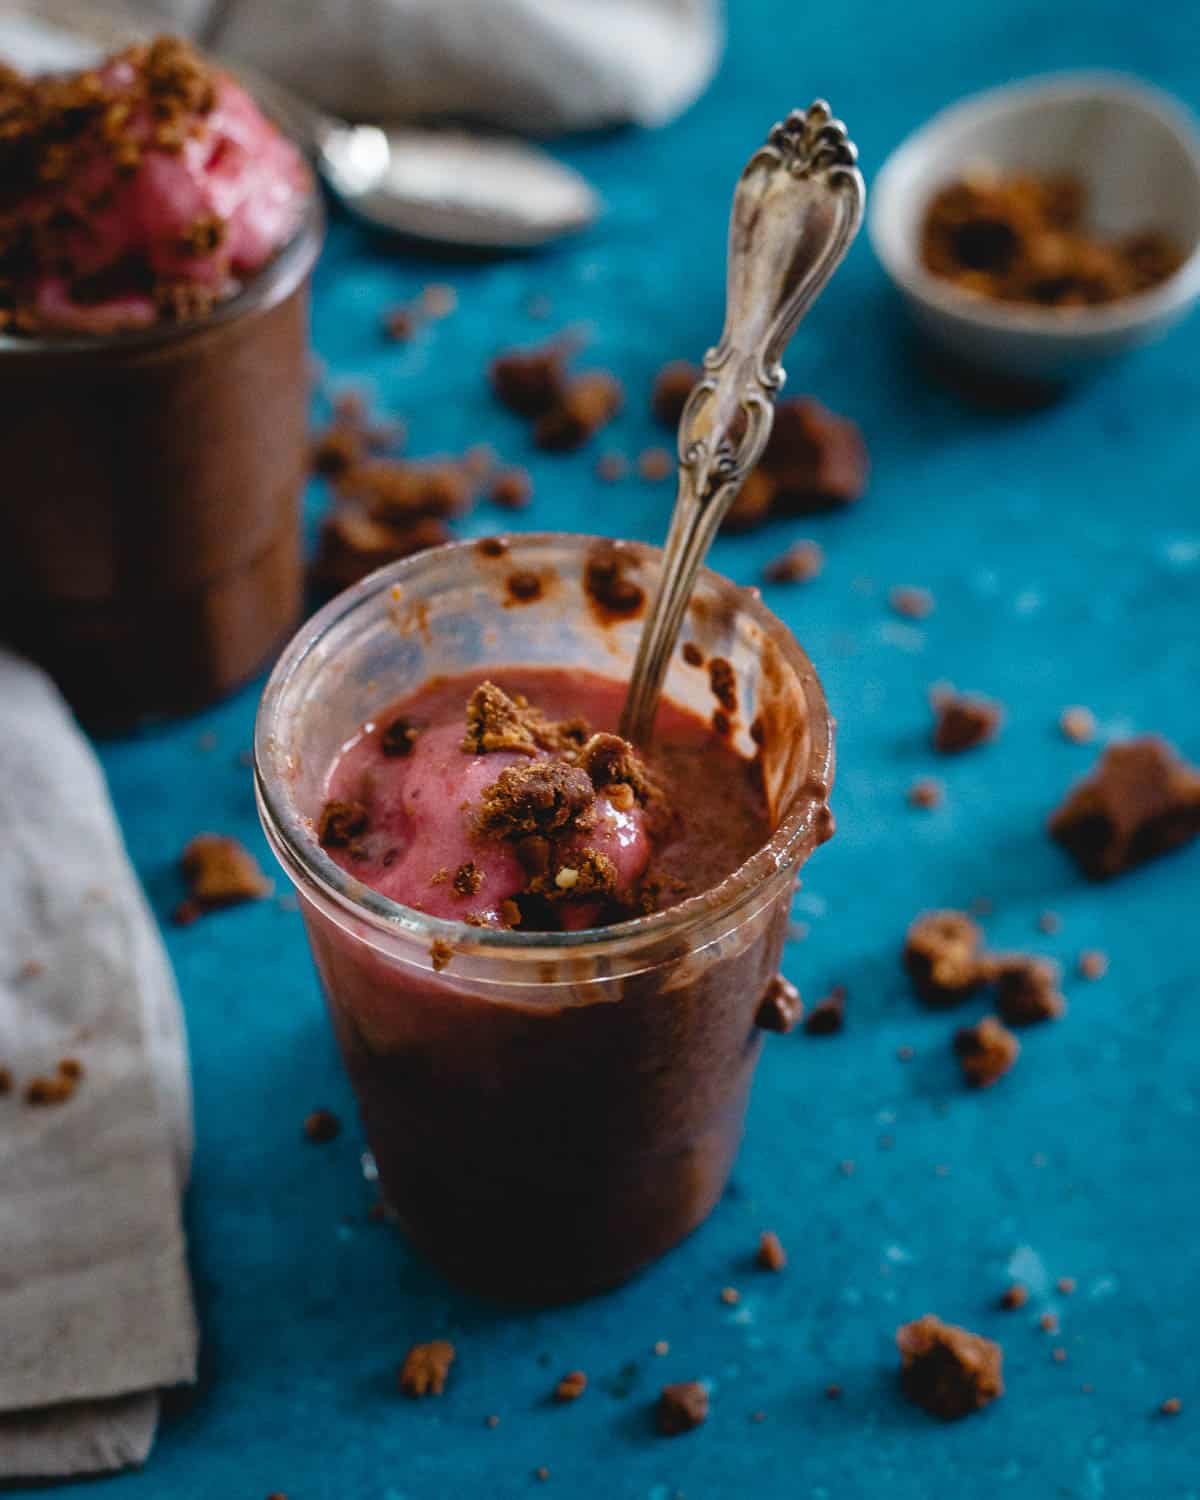 This peanut butter chocolate chia pudding is a dessert you can feel good about eating. So much goodness packed into a healthy parfait!